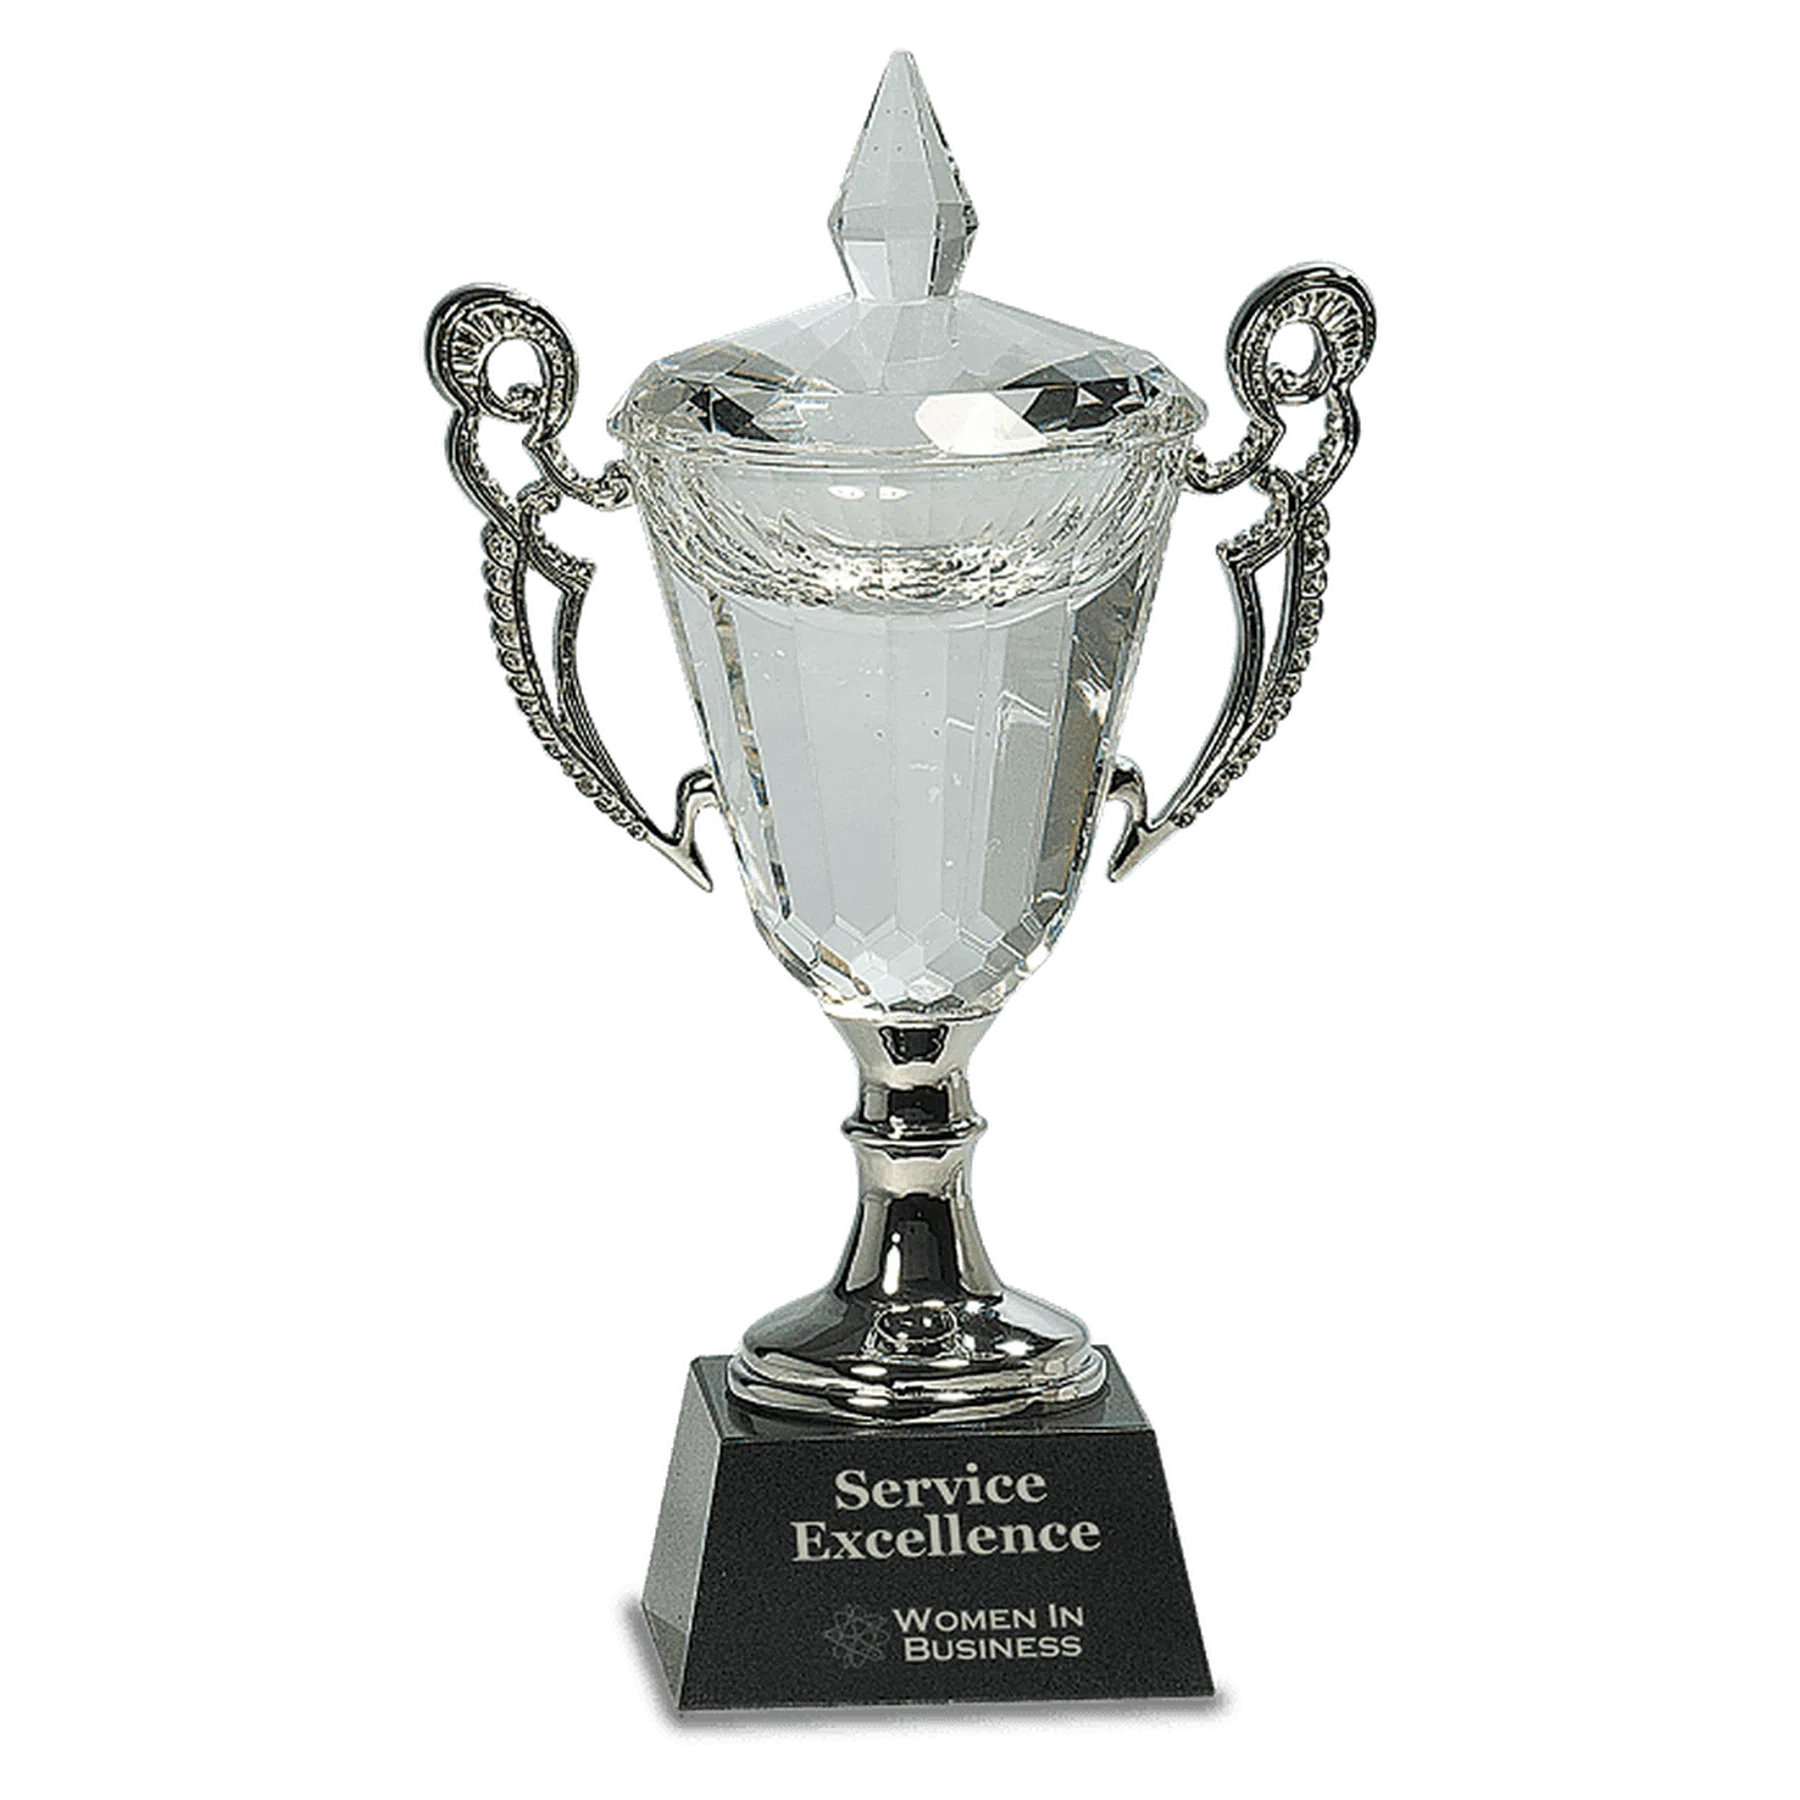 Crystal Trophy Cup with Silver Handles and Stem